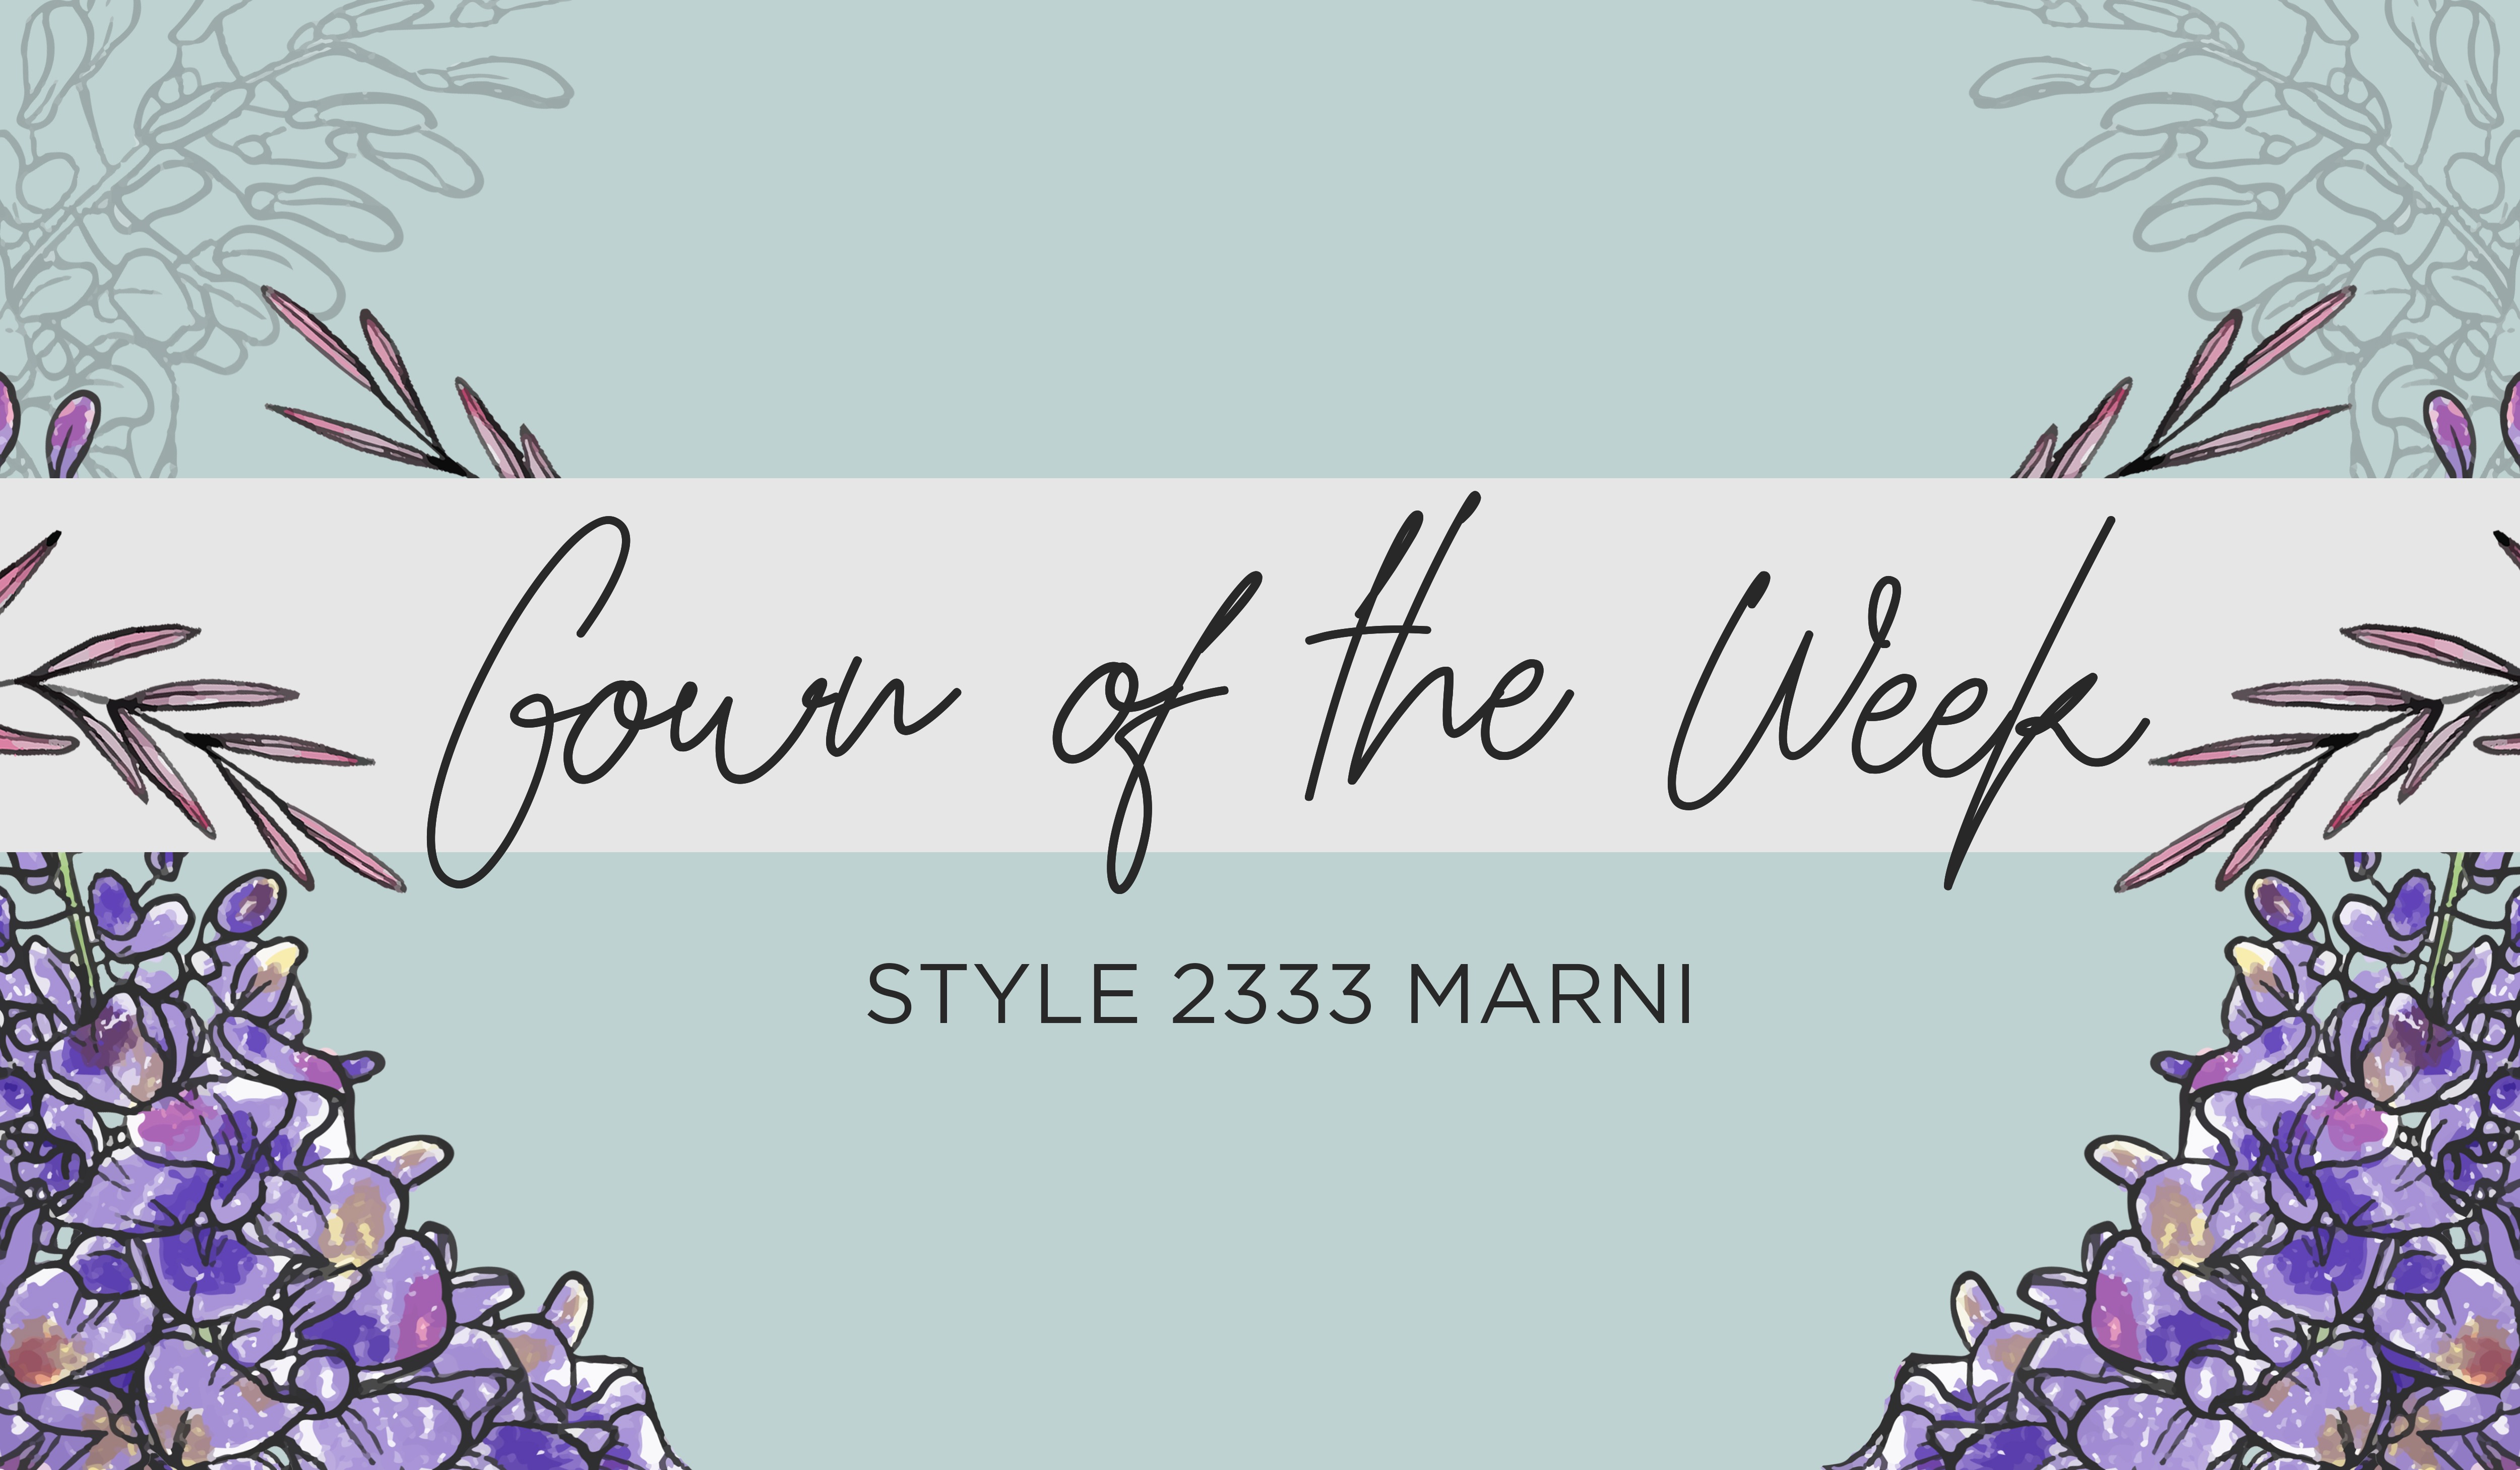 Style 2333 Marni | Casablanca Bridal Gown of the Week